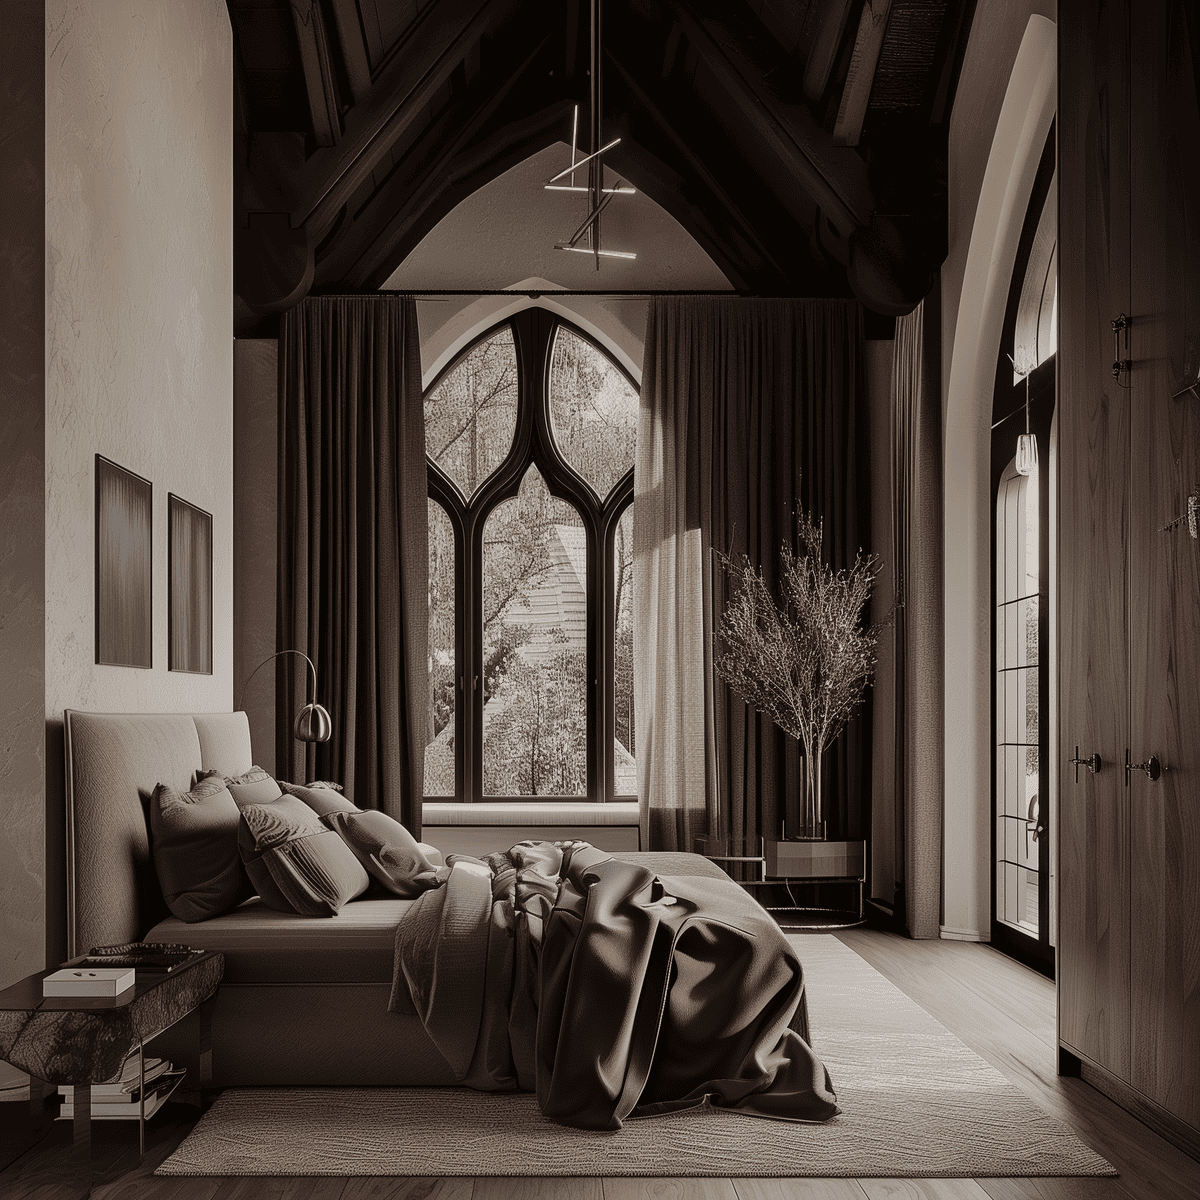 A cozy bedroom featuring a large bed with grey bedding in front of tall, pointed arch windows draped in heavy curtains, under a wooden cathedral ceiling with a modern light fixture.